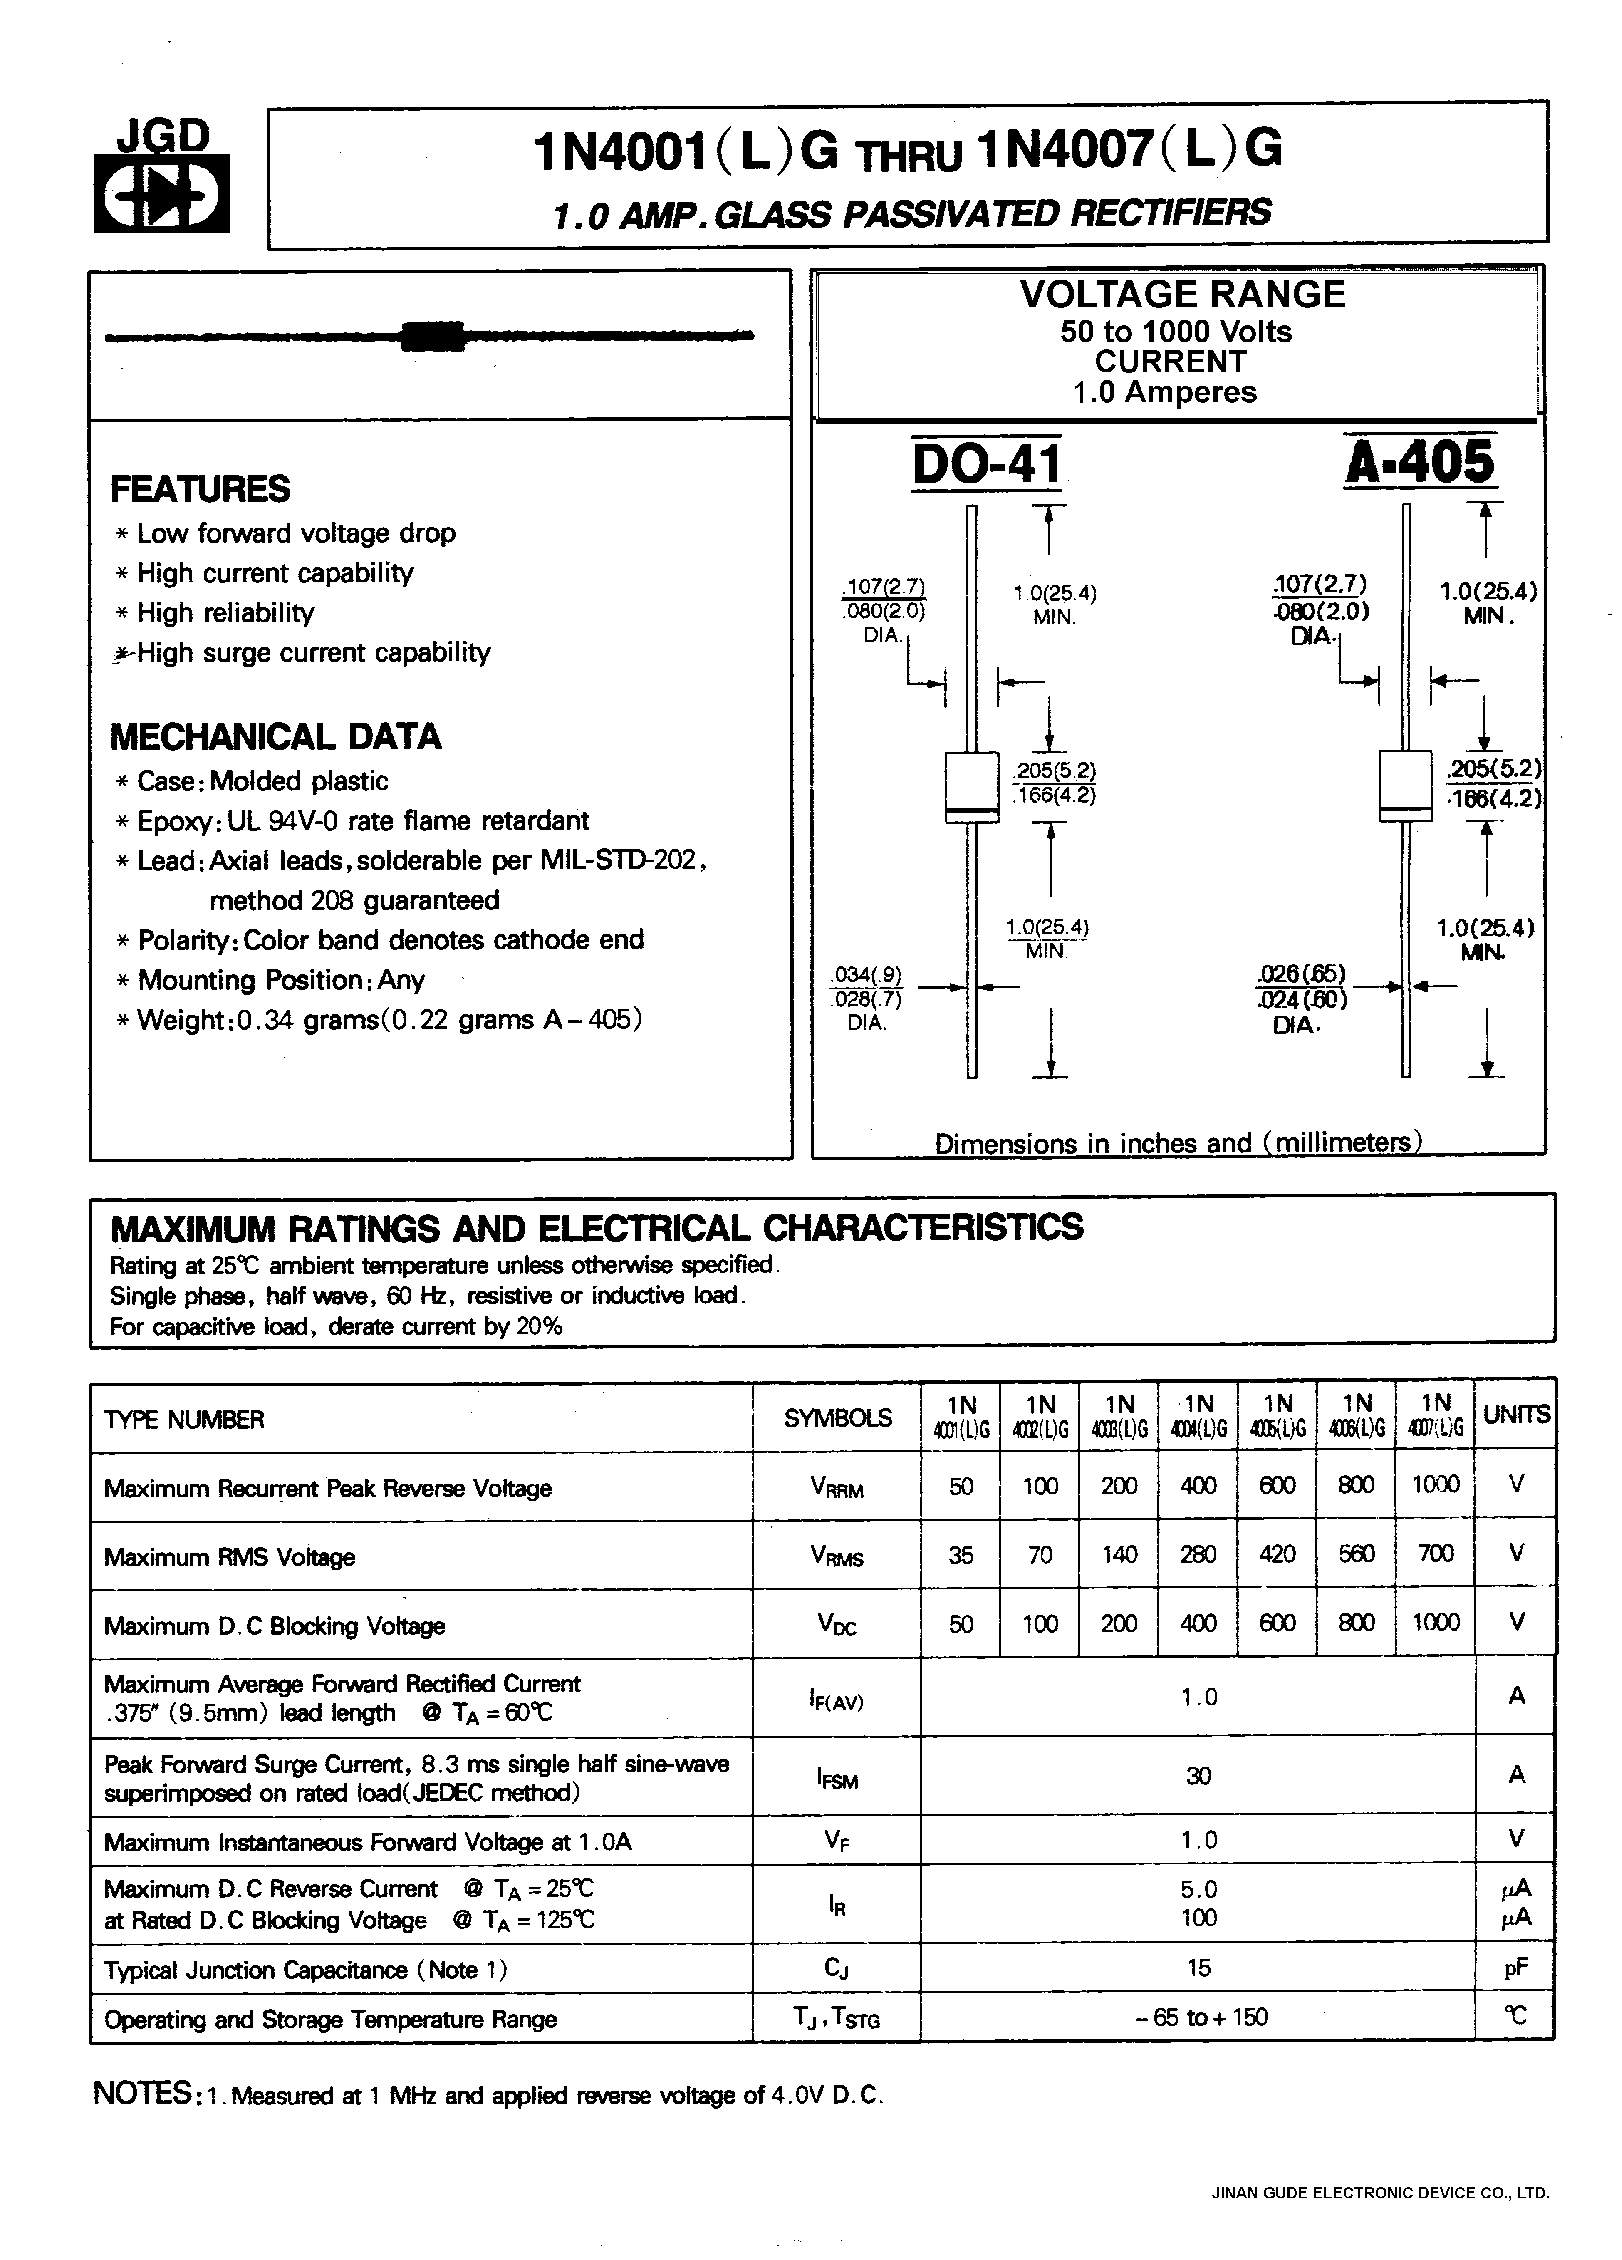 Datasheet 1N4001 - (1N4001 - 1N4007) 1.0 AMP.GLASS PASSIVATED RECTIFIERS page 2